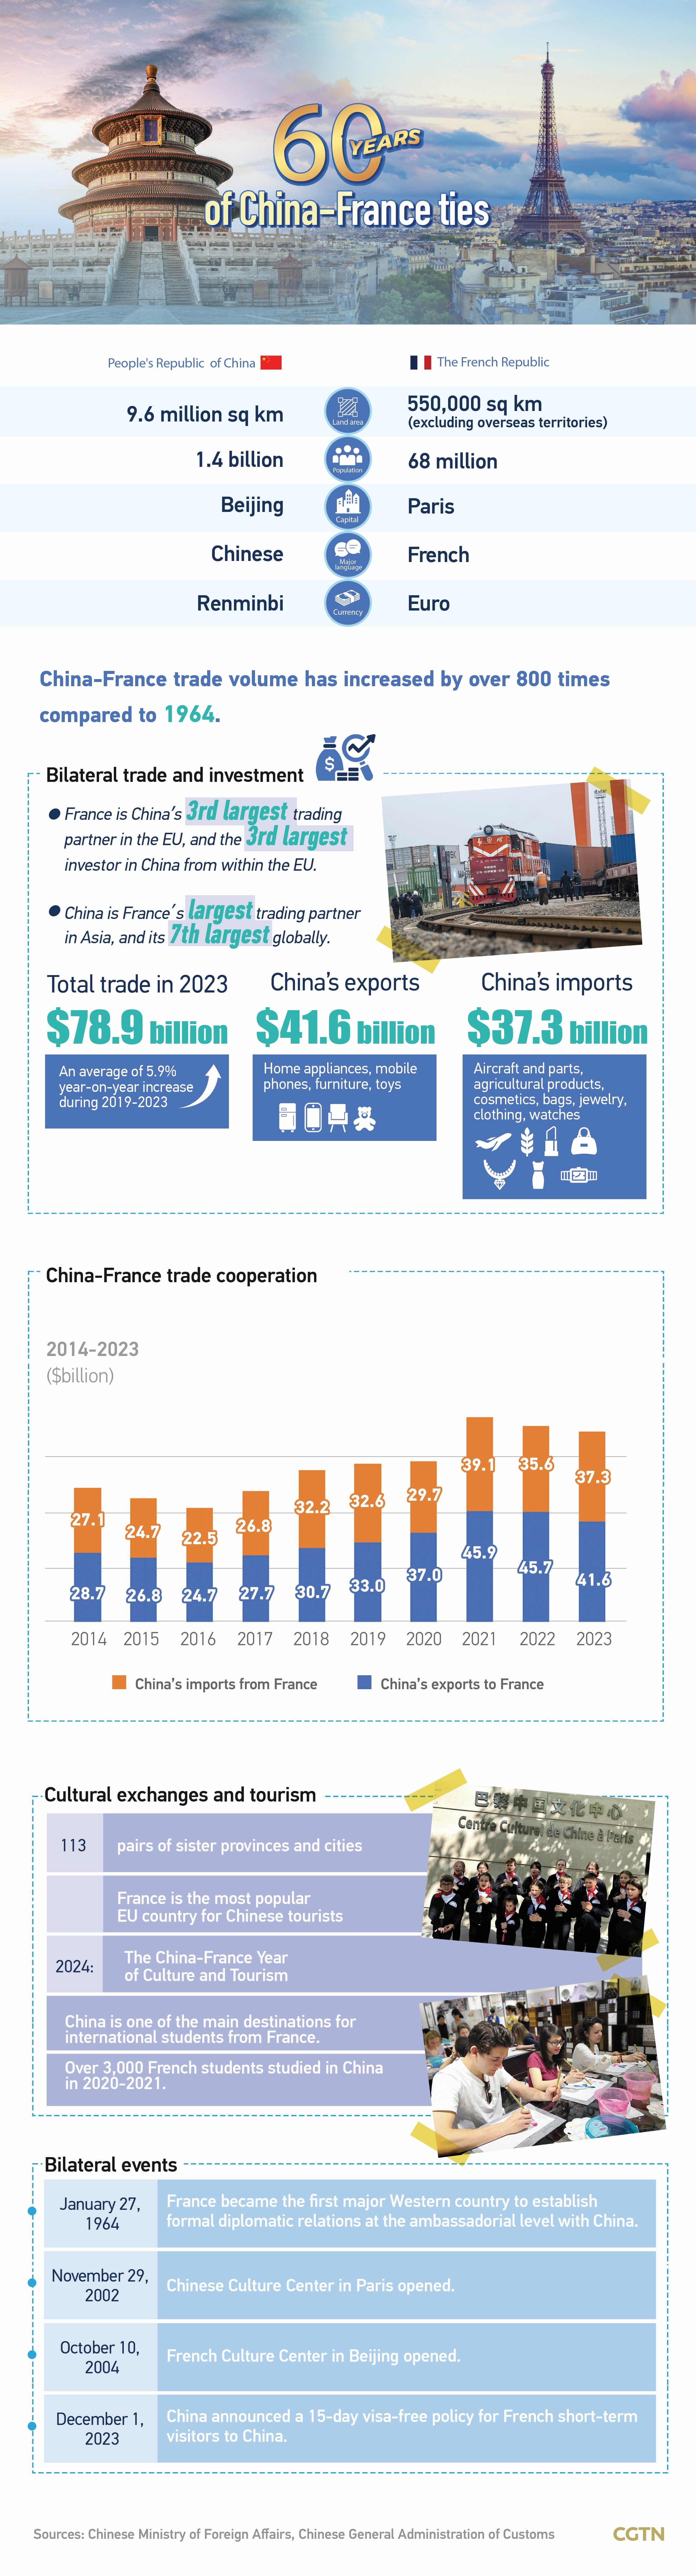 Graphics: China-France cooperation over 60 years